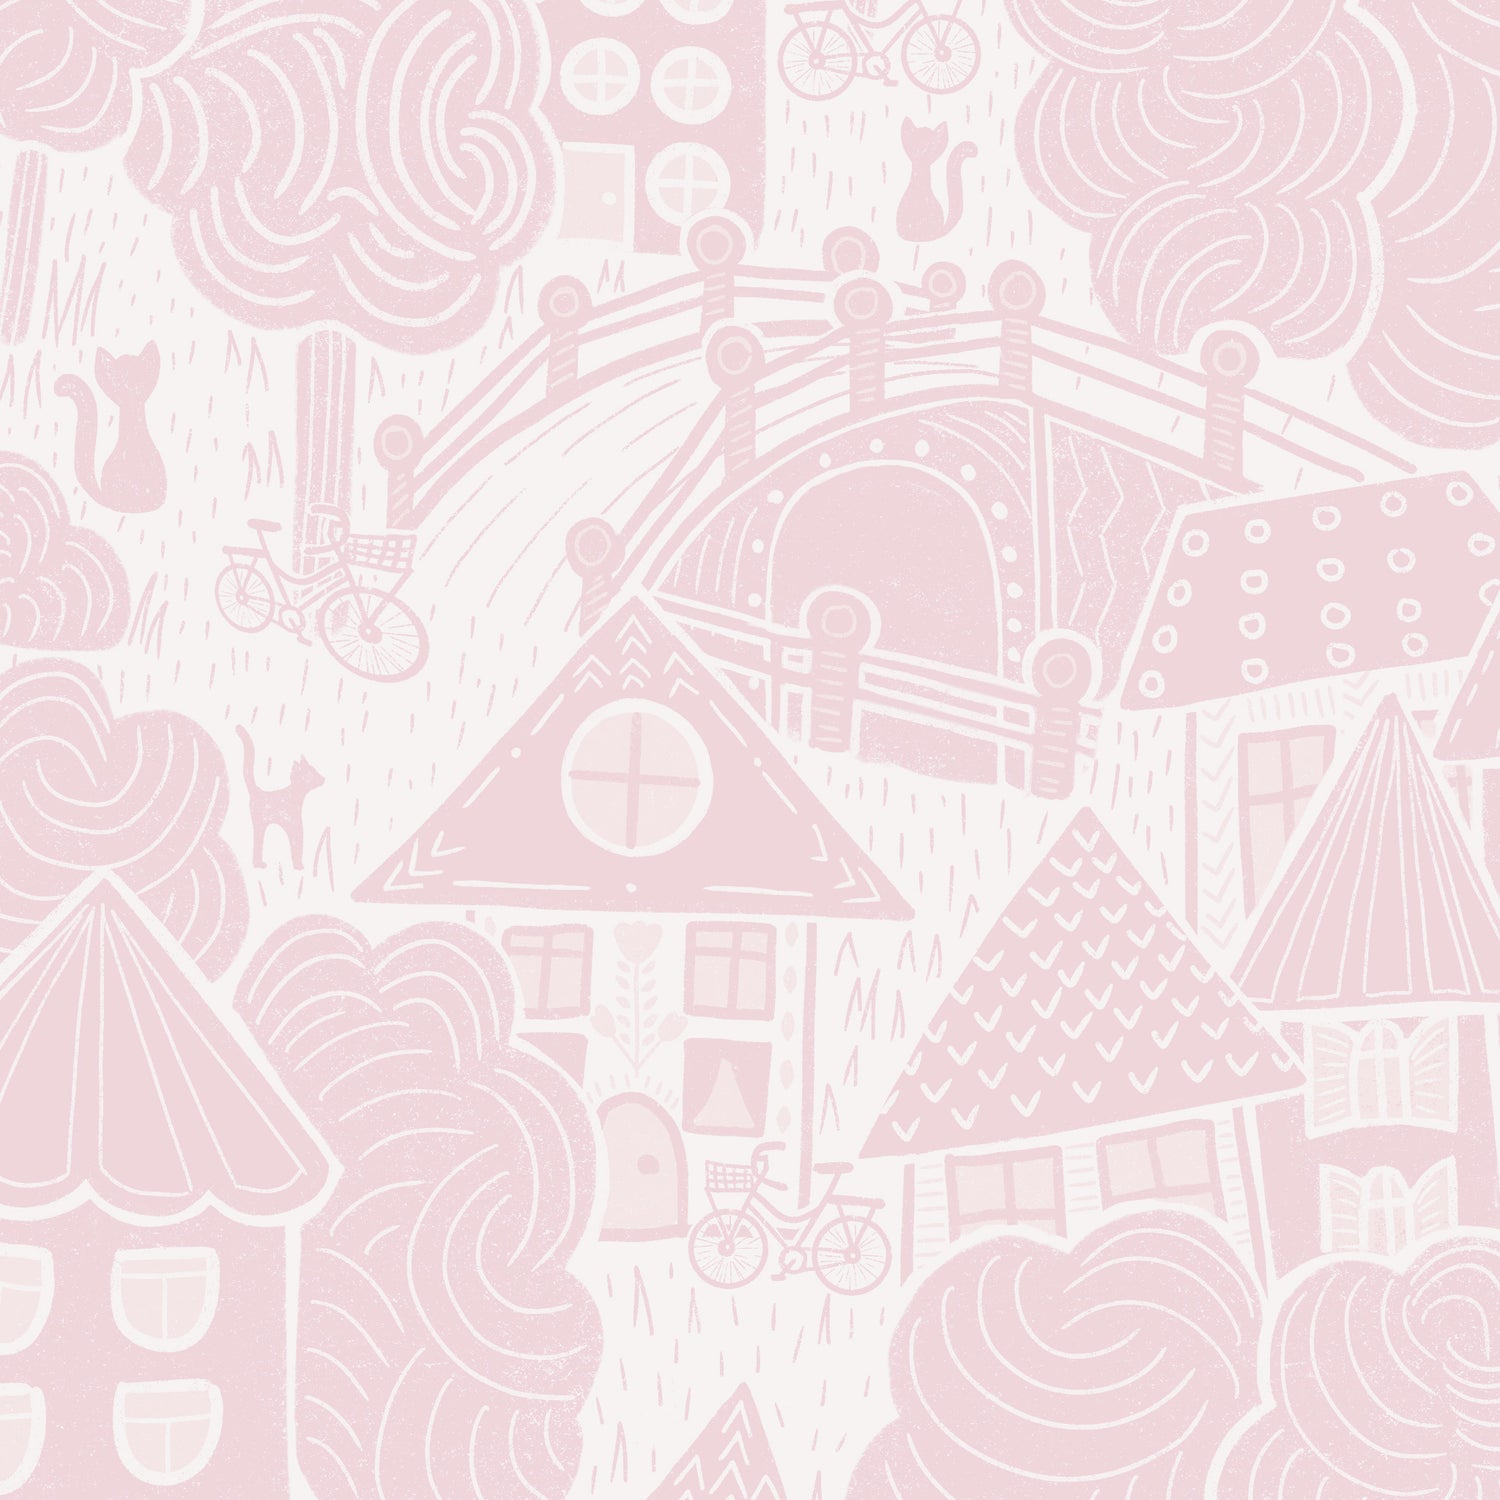 Houses Wallpaper in Pink shown in a close up view.